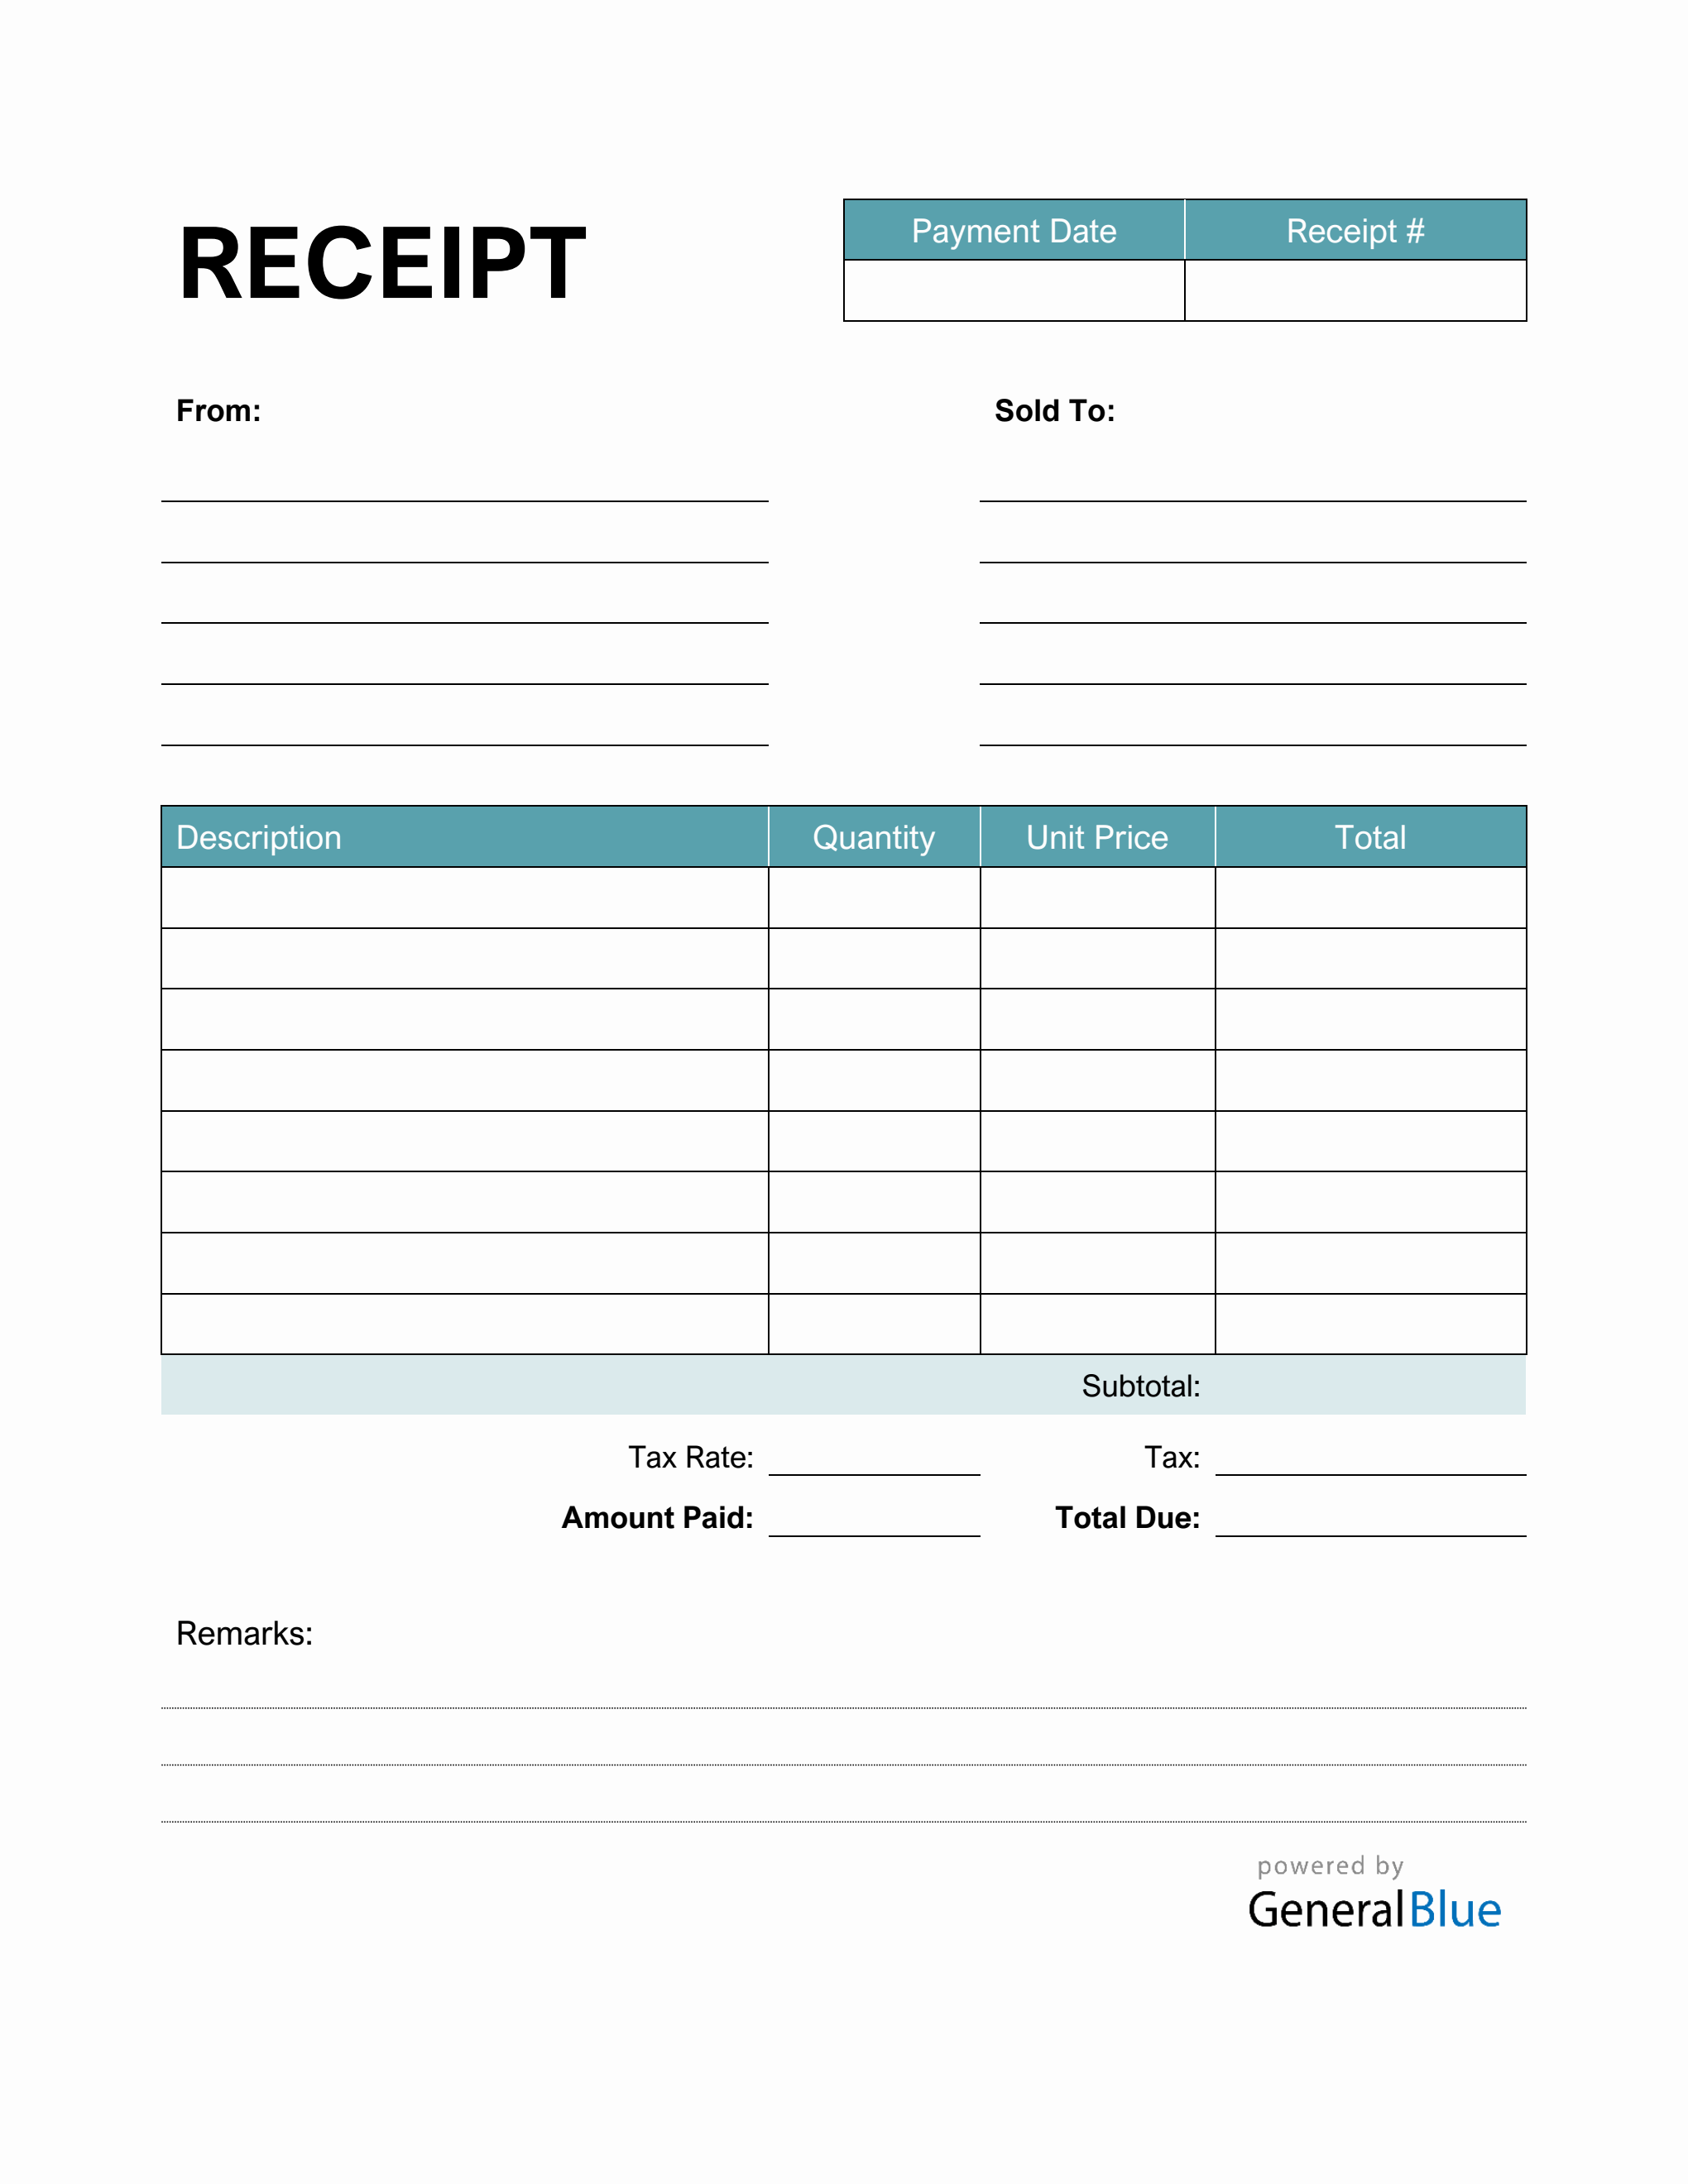 Printable Receipt Template in PDF (Basic)